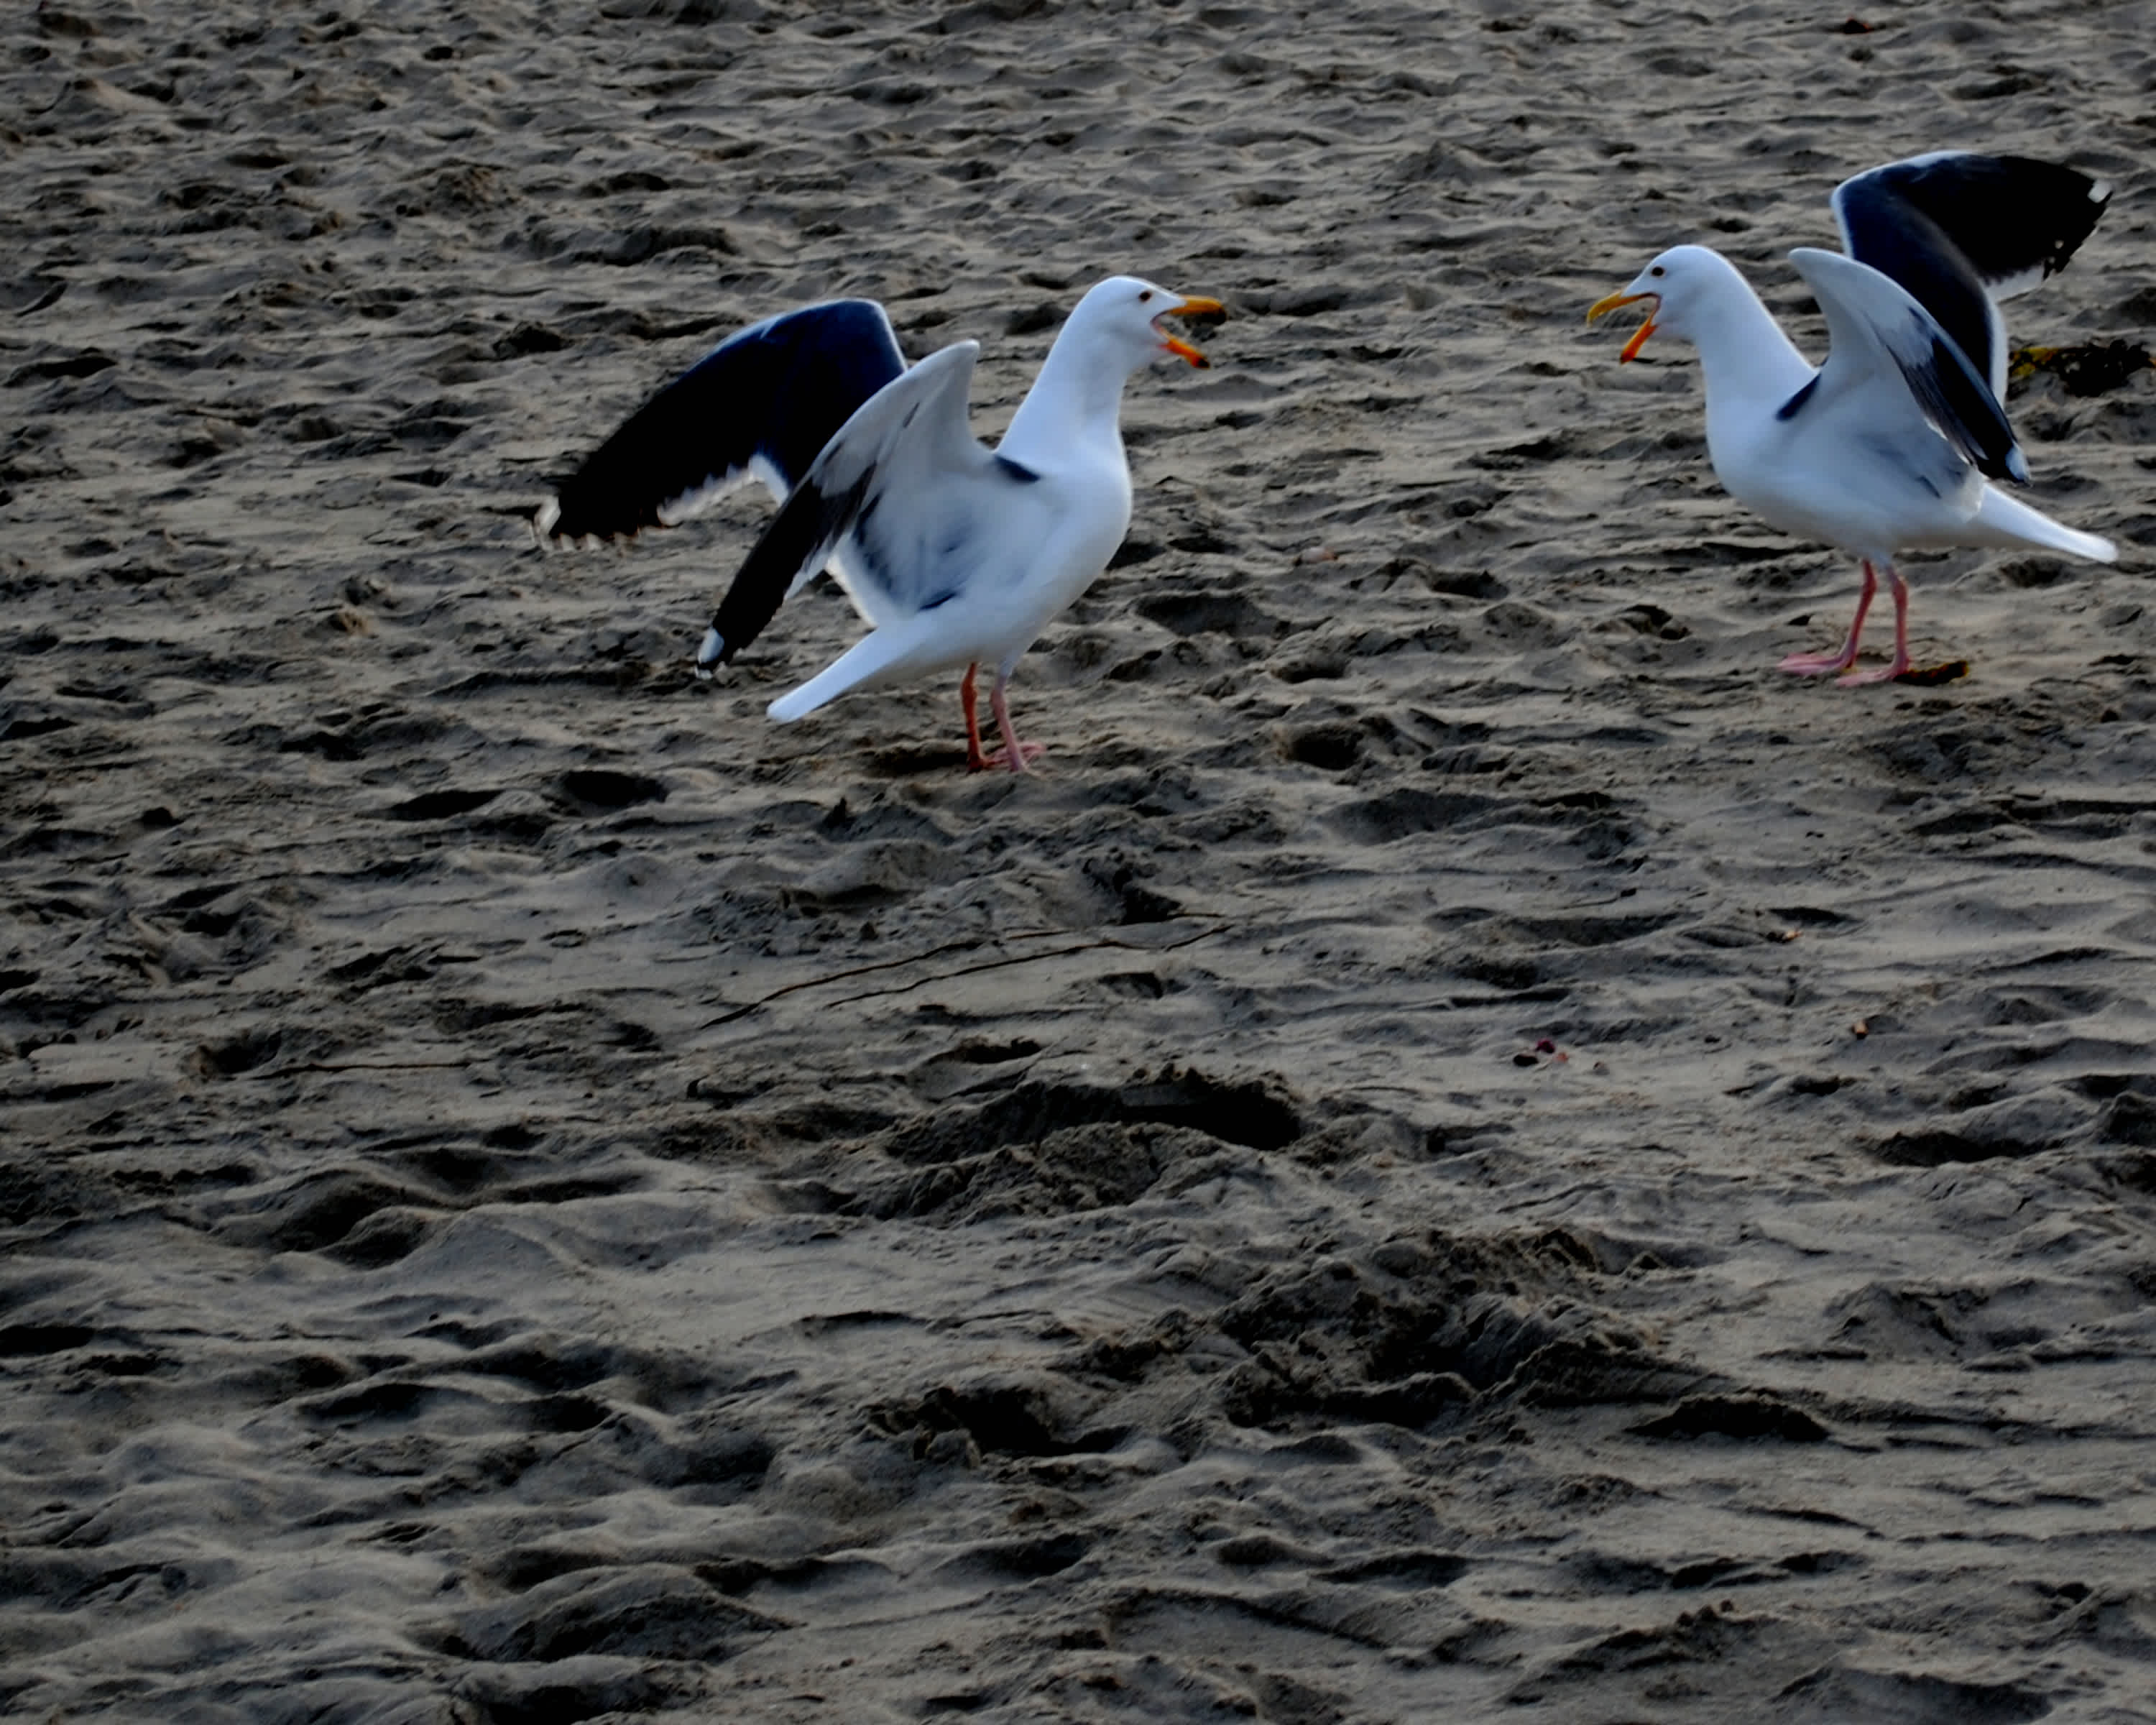 Two white birds flapping wings at each other on the sand.